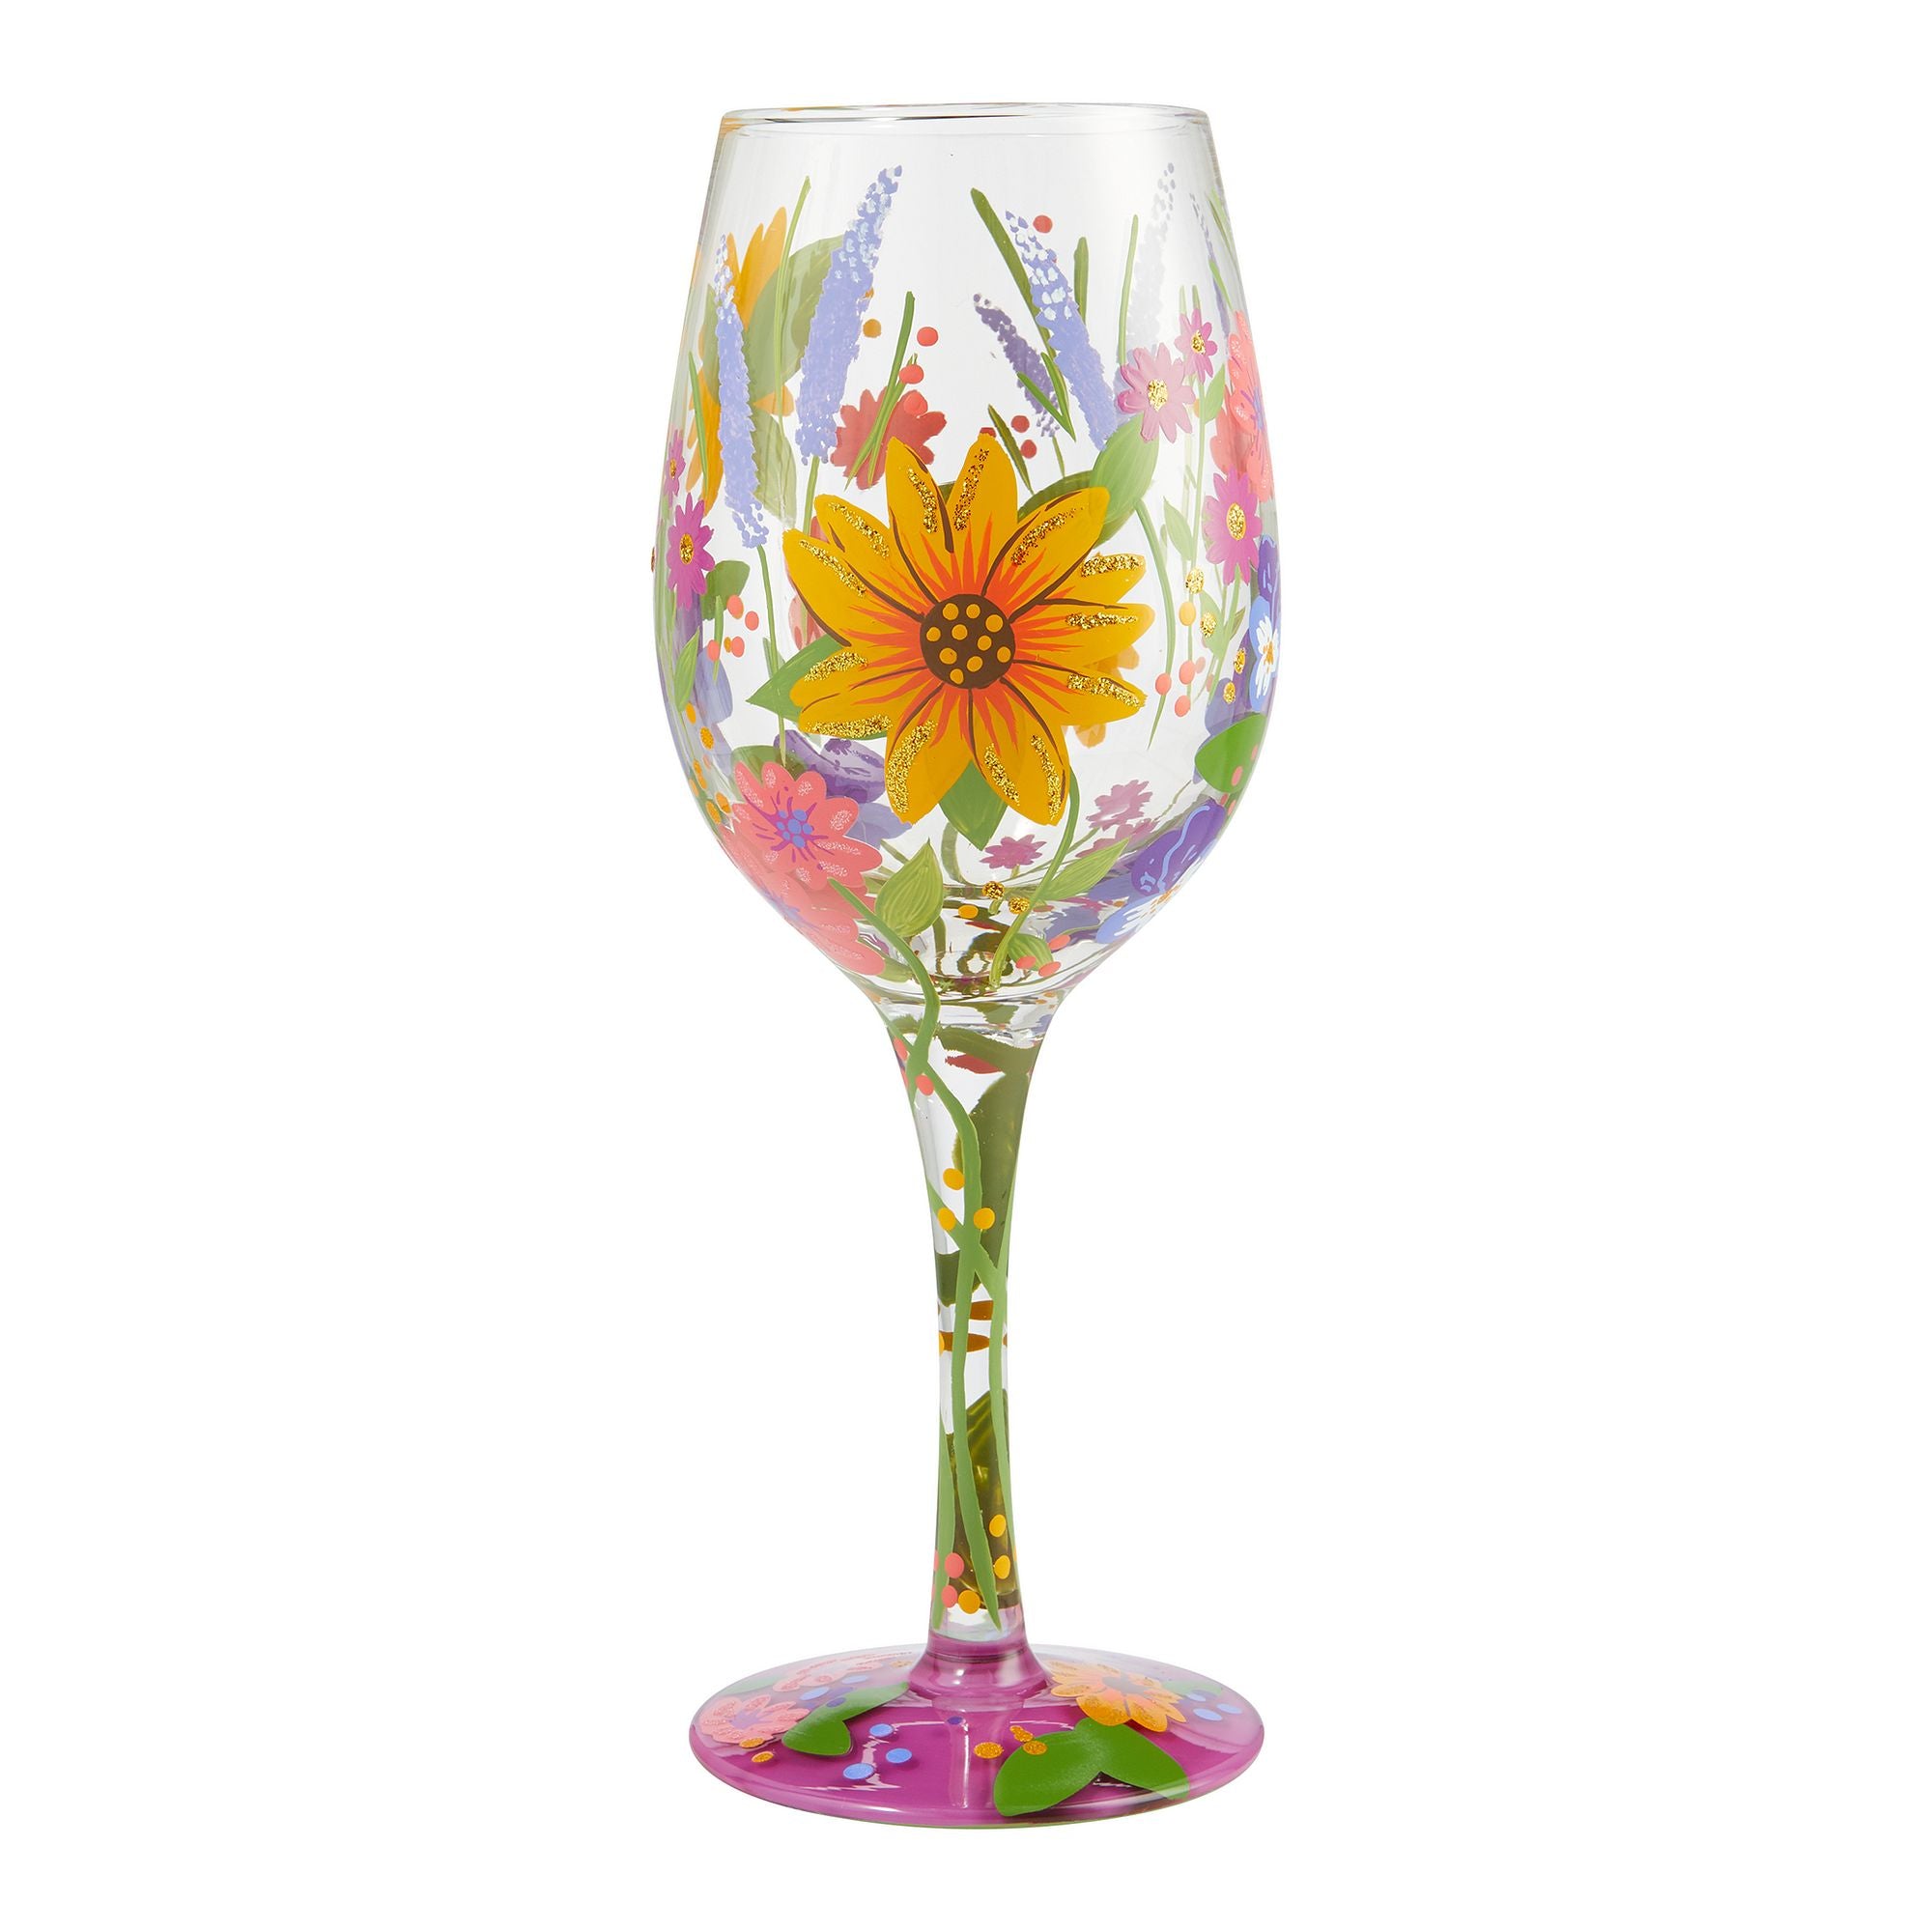 LOLITA LOVE MY WINE MOTHER OF THE BRIDE HAND-PAINTED 15 OZ WINE GLASS.